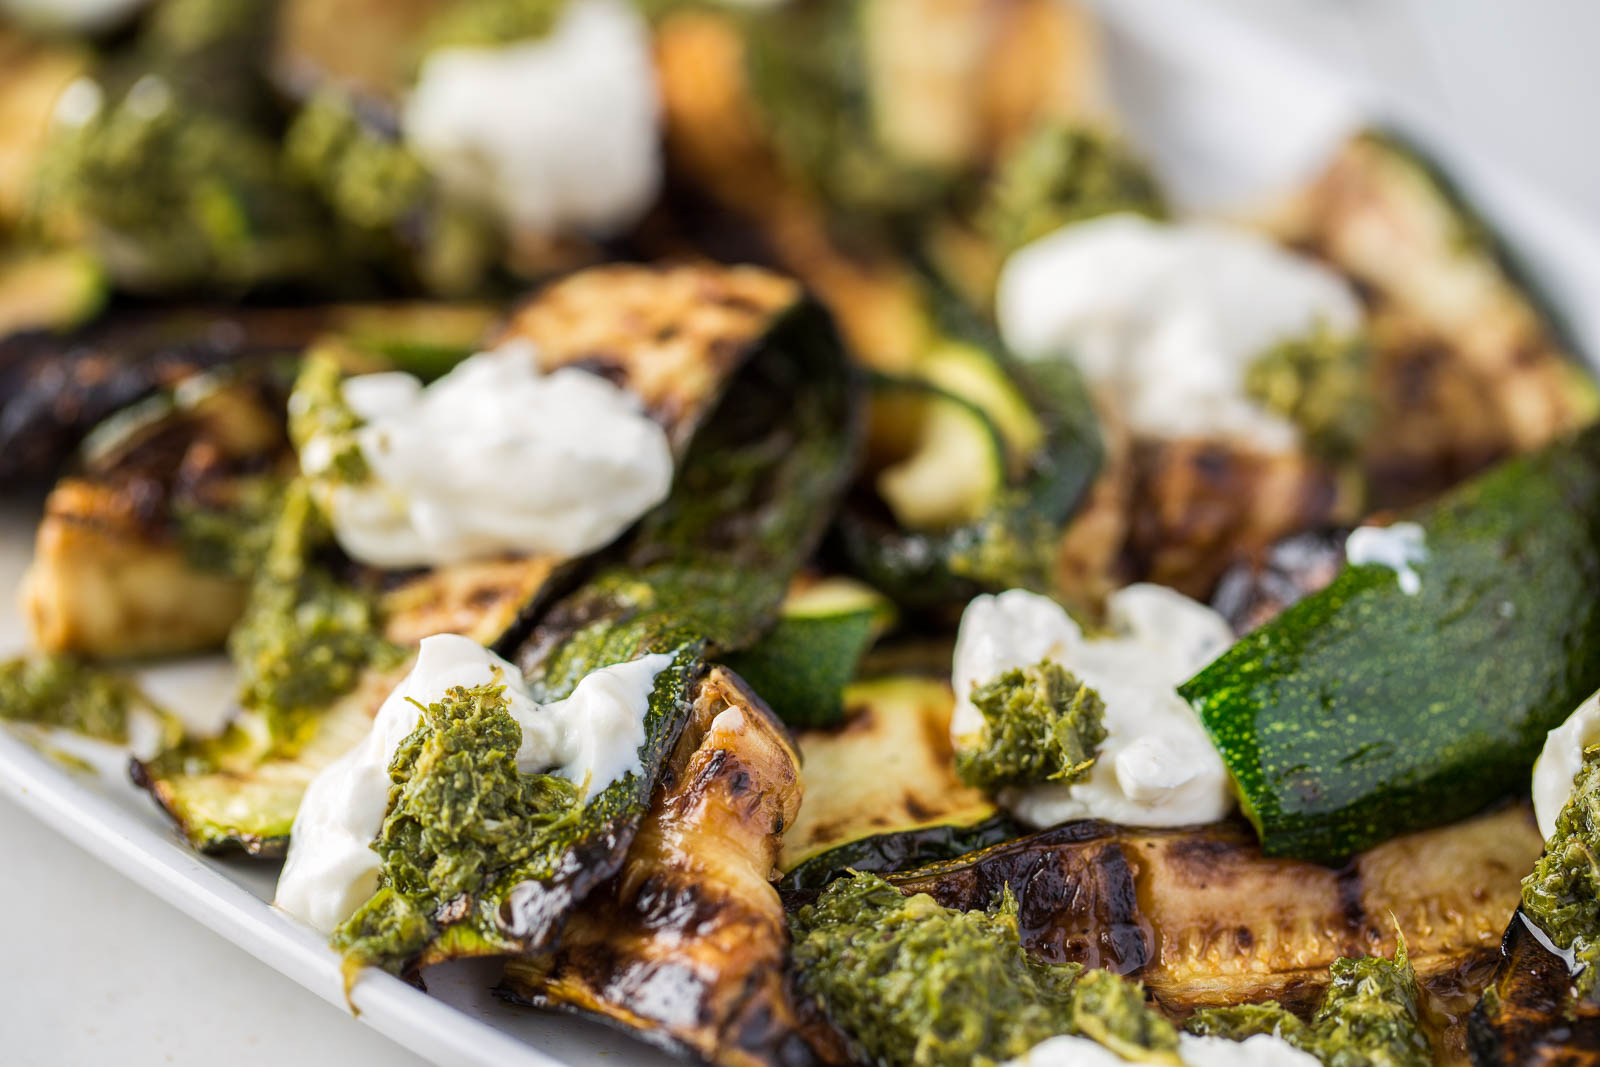 A bright and full flavoured summery vegetarian BBQ Courgette dish which uses full flavoured charred courgette slices topped with thick, creamy labneh and rich, tangy mint sauce. It's a dish to have both vegetarians and meat eaters drooling!